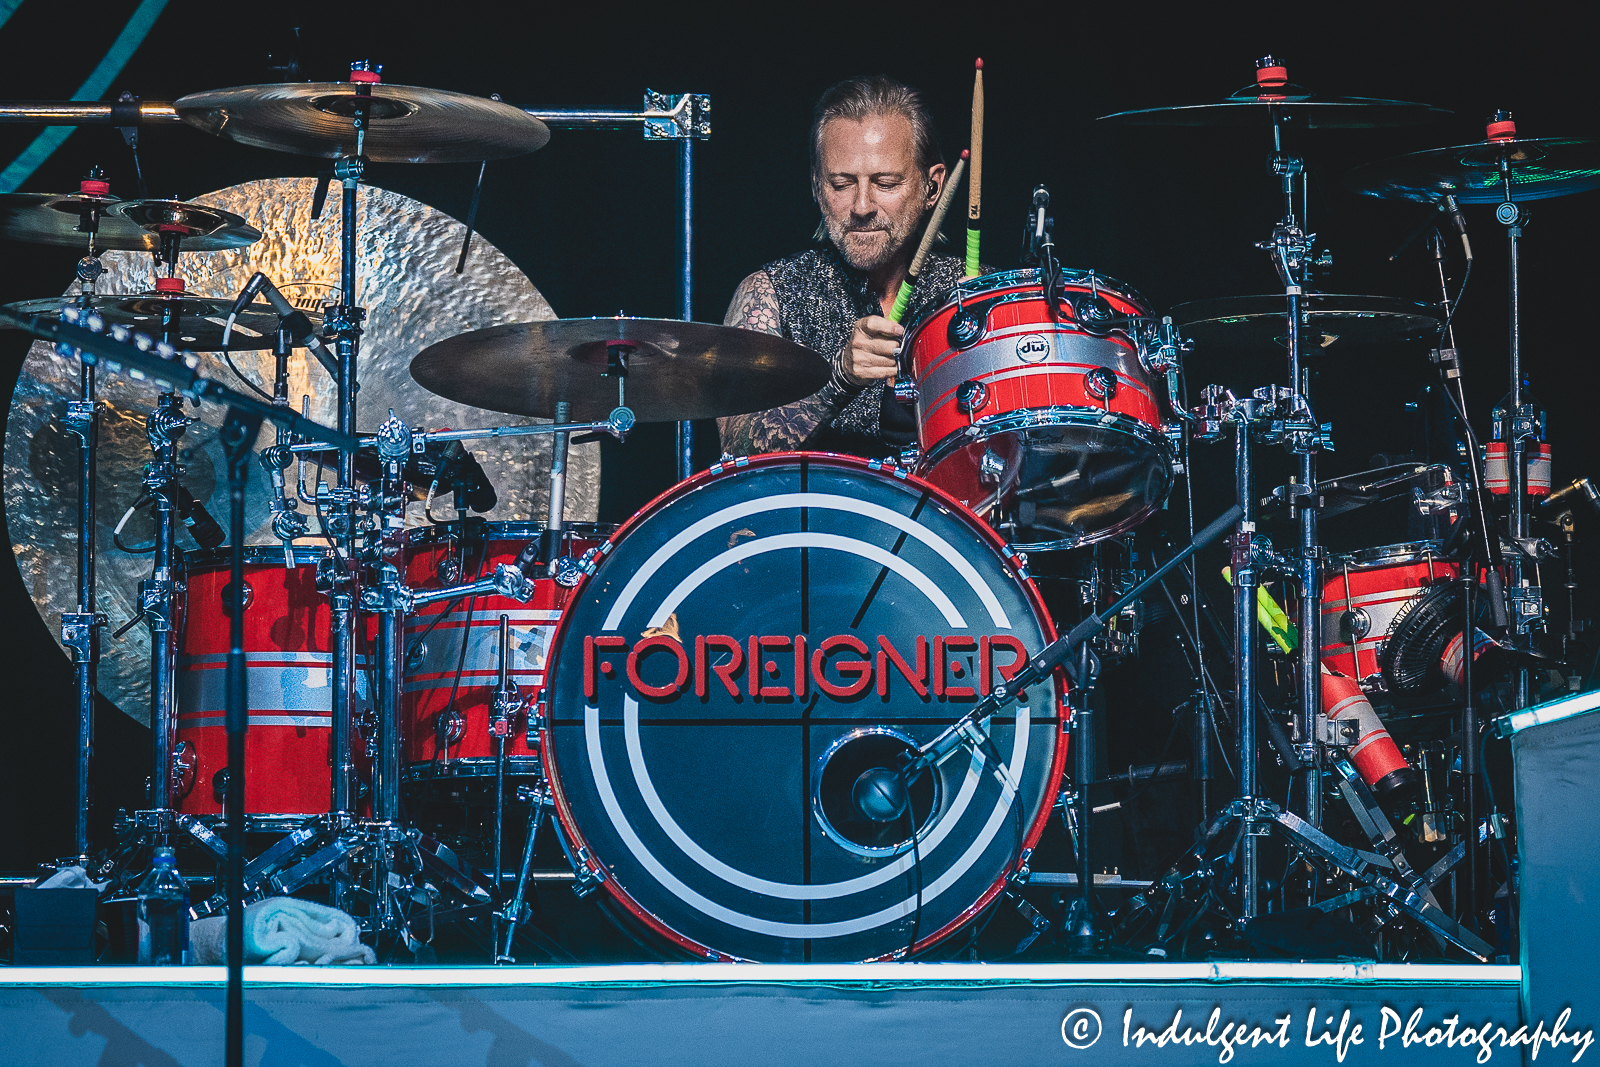 Foreigner drummer Chris Frazier performing live on "The Historic Farewell Tour" at Starlight Theatre in Kansas City, MO on July 18, 2023.